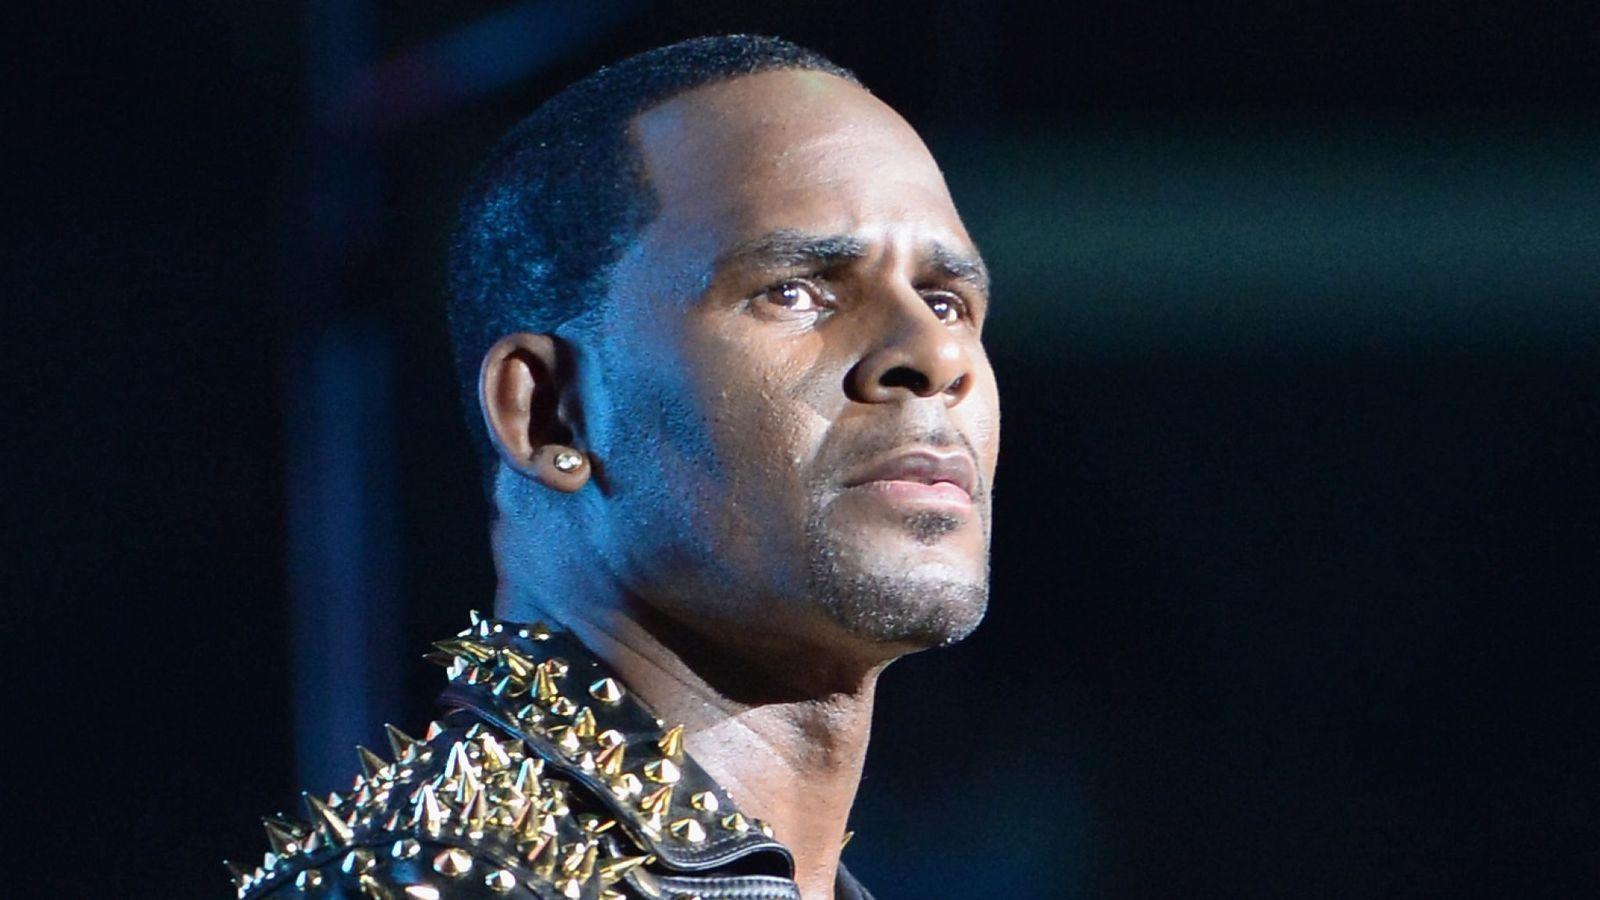 Prosecutor asks R Kelly's alleged abuse victims to come forward